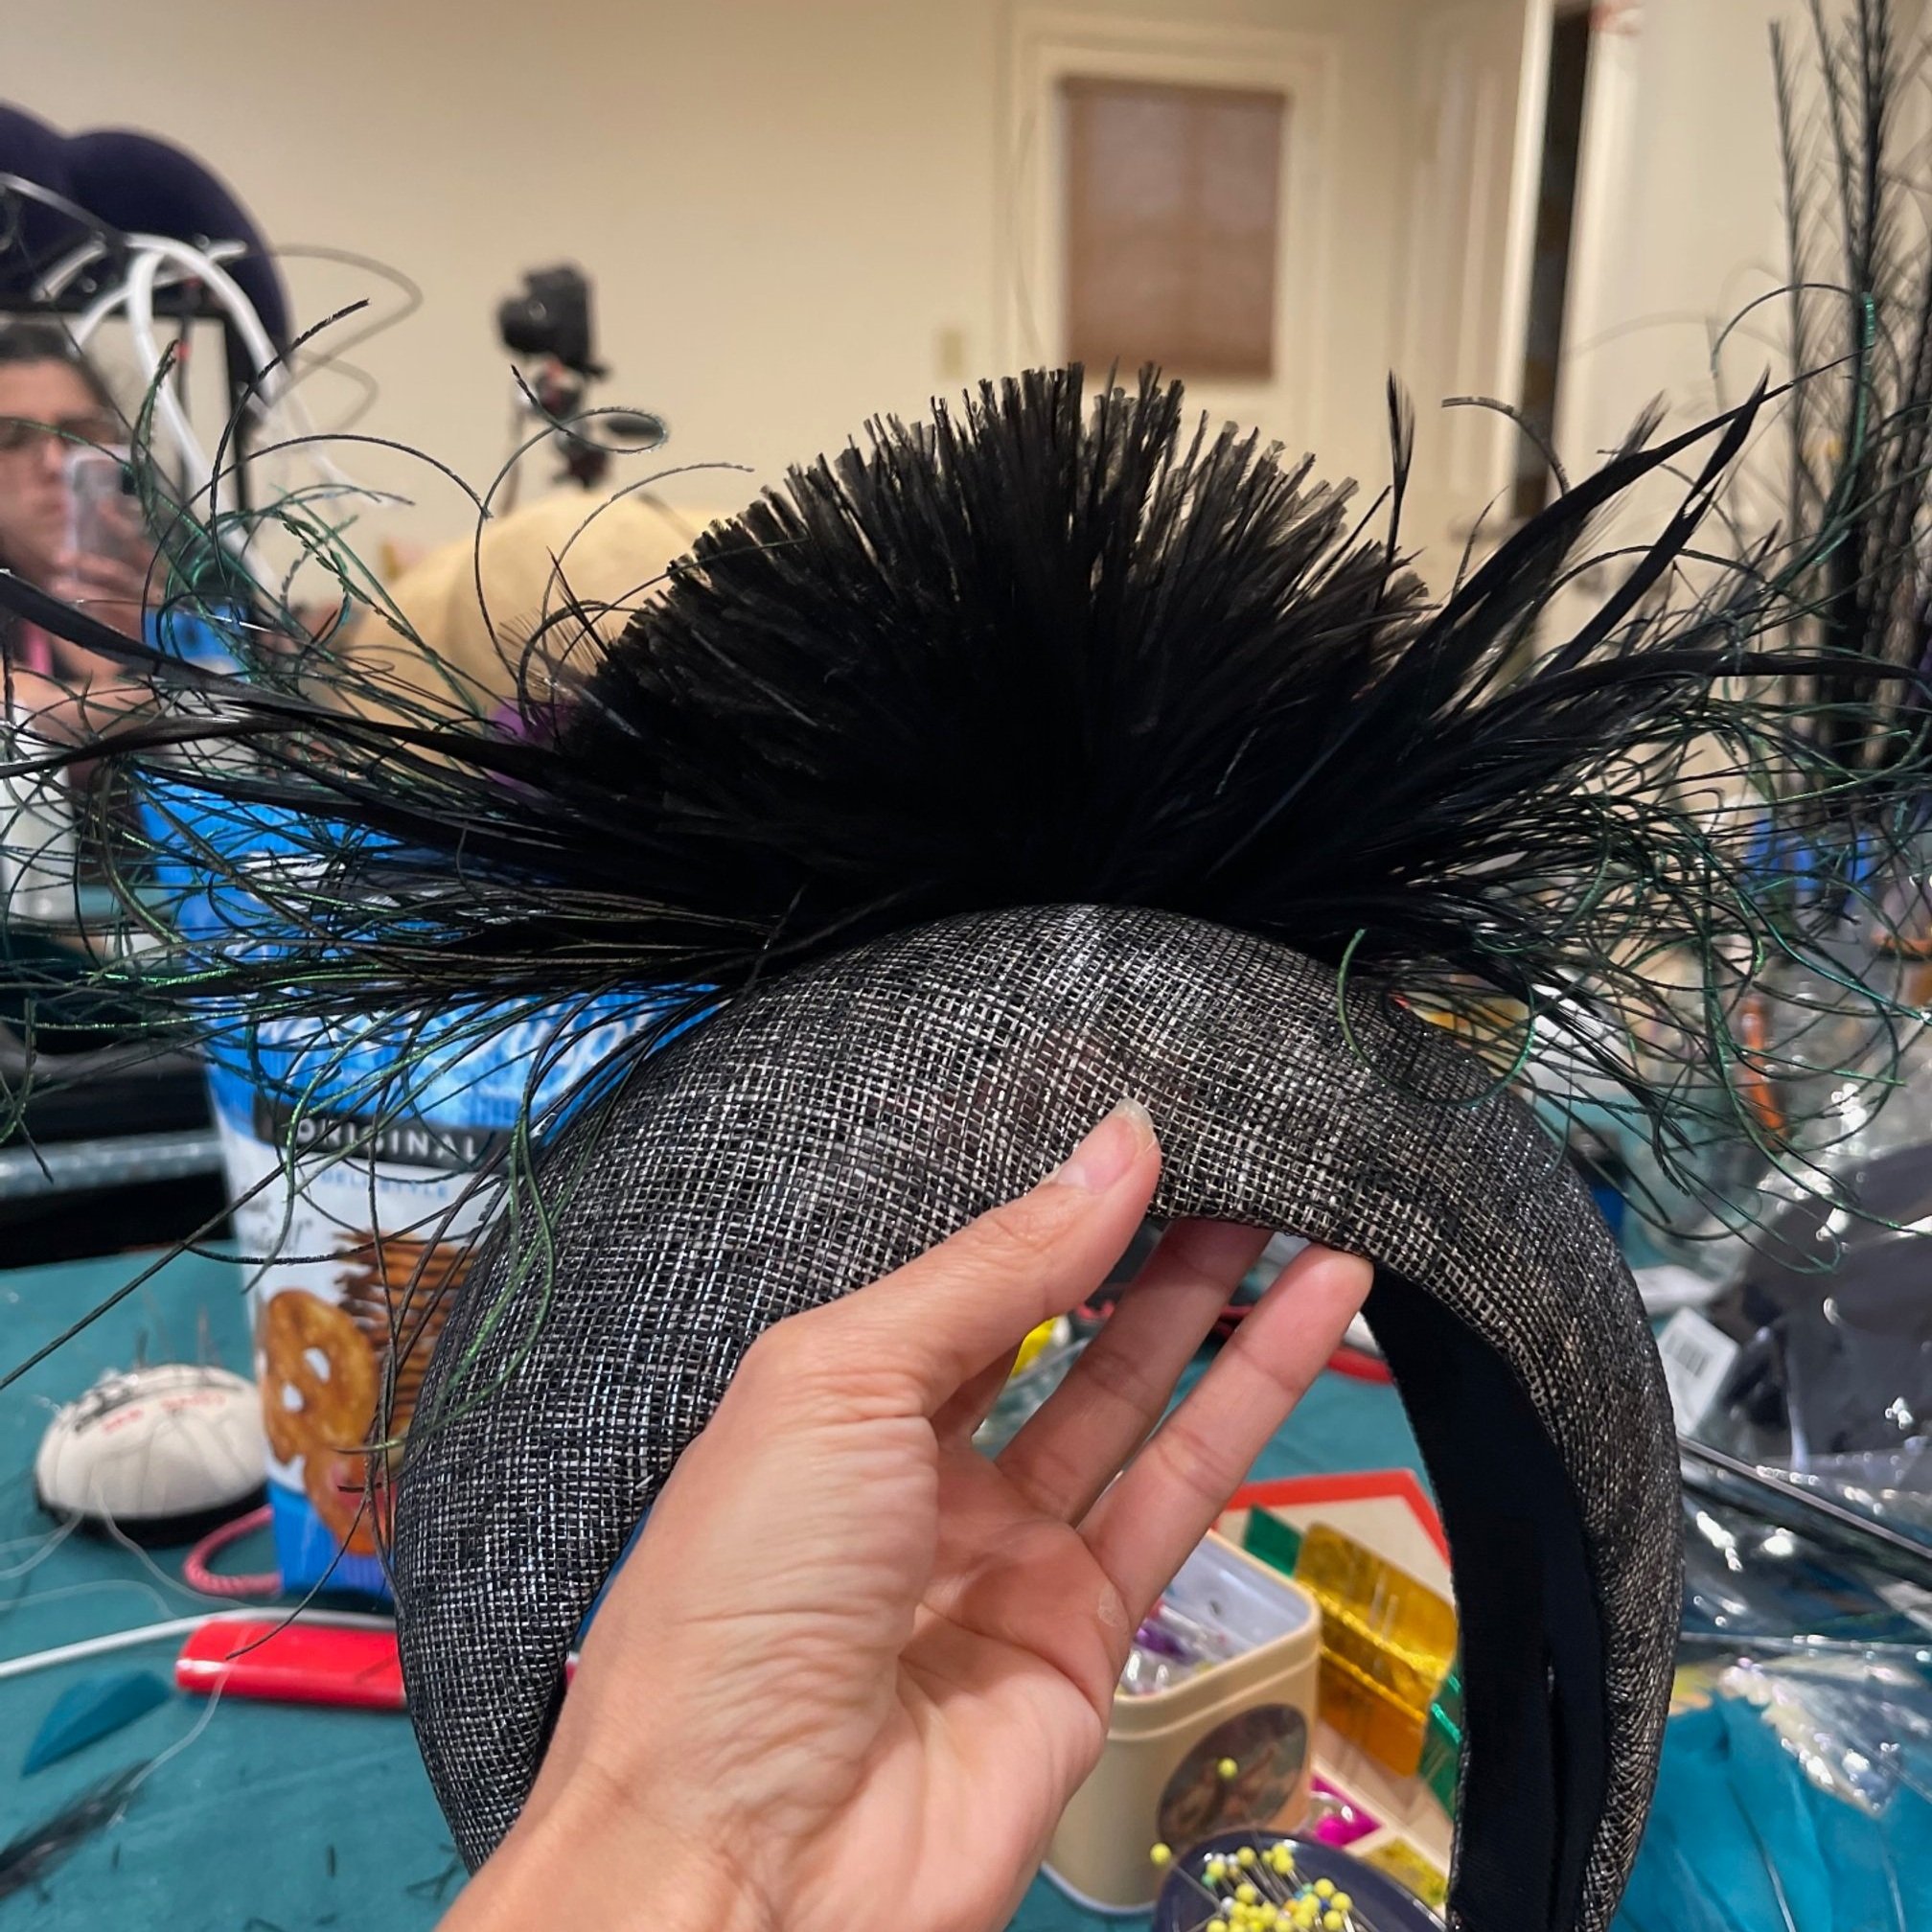 Anne Rice's 33rd Annual Lestat Vampire Ball 2021 — Maria Etkind Millinery